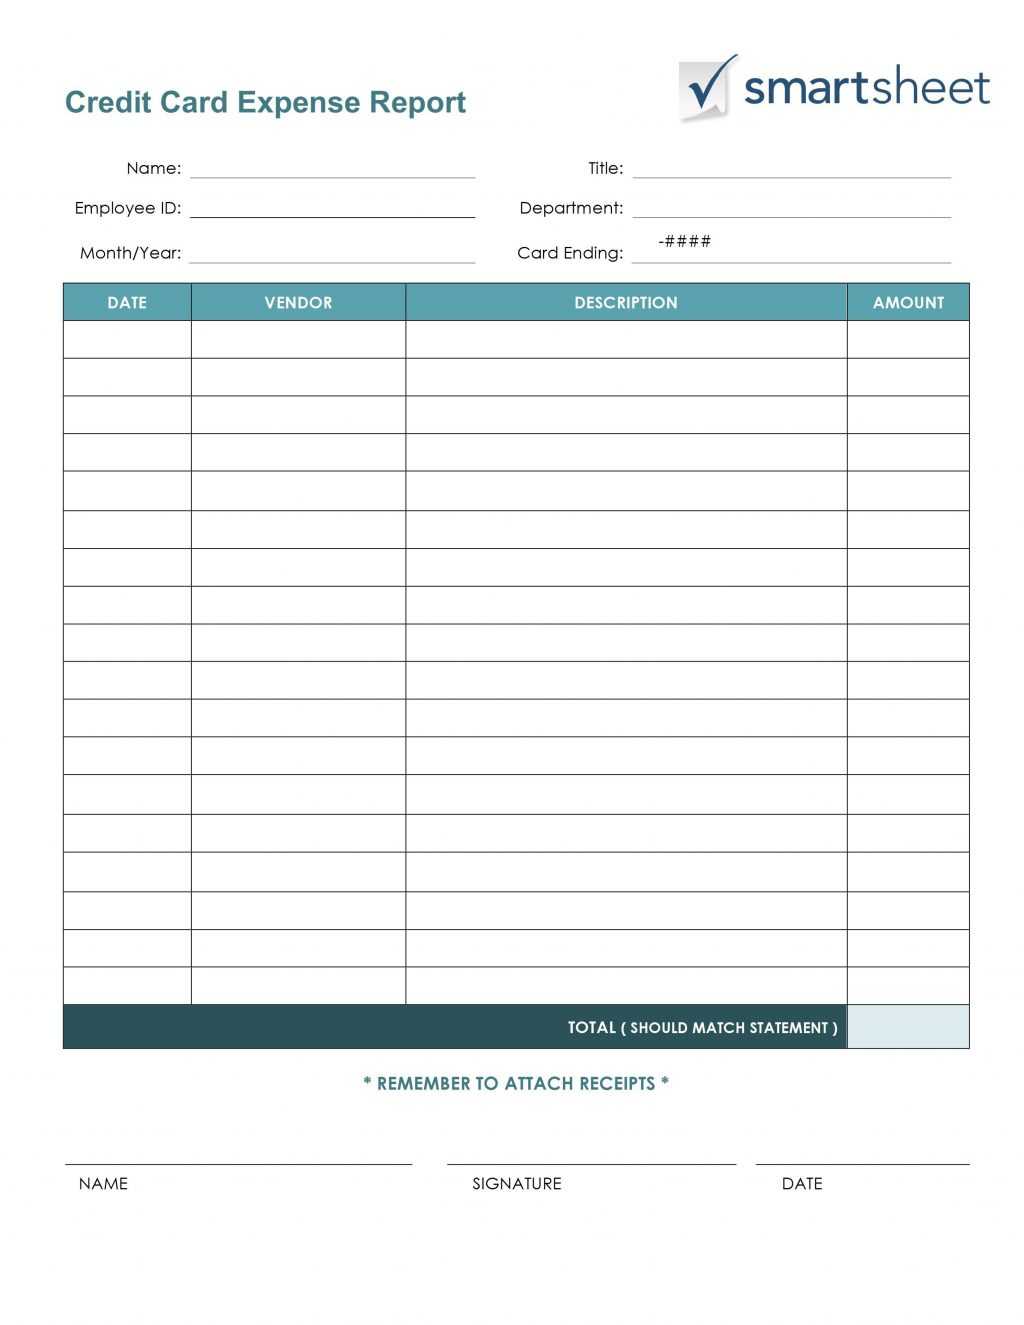 Credit Card Budget Spreadsheet Template Employee Expense For Expense Report Template Excel 2010